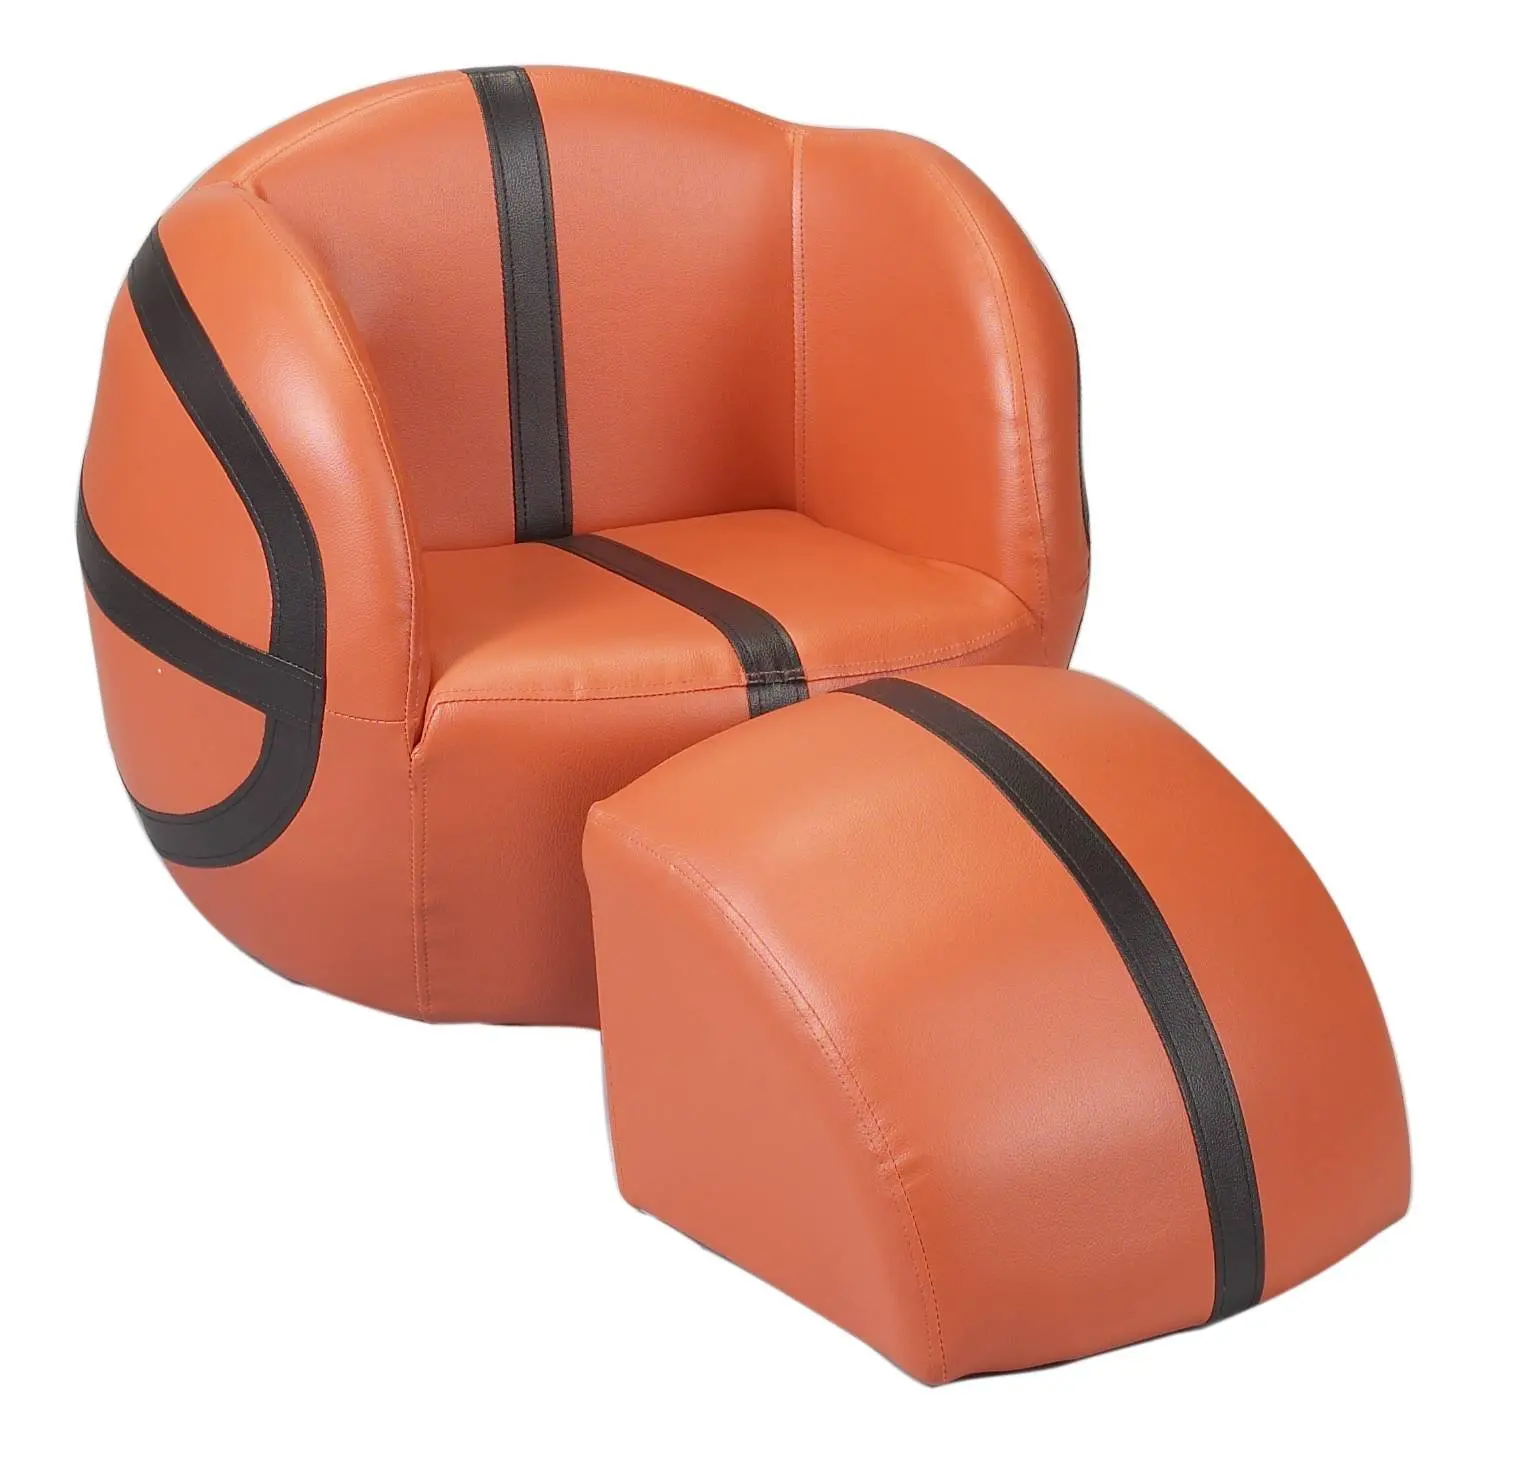 Cheap Chair Basketball Game Find Chair Basketball Game Deals On